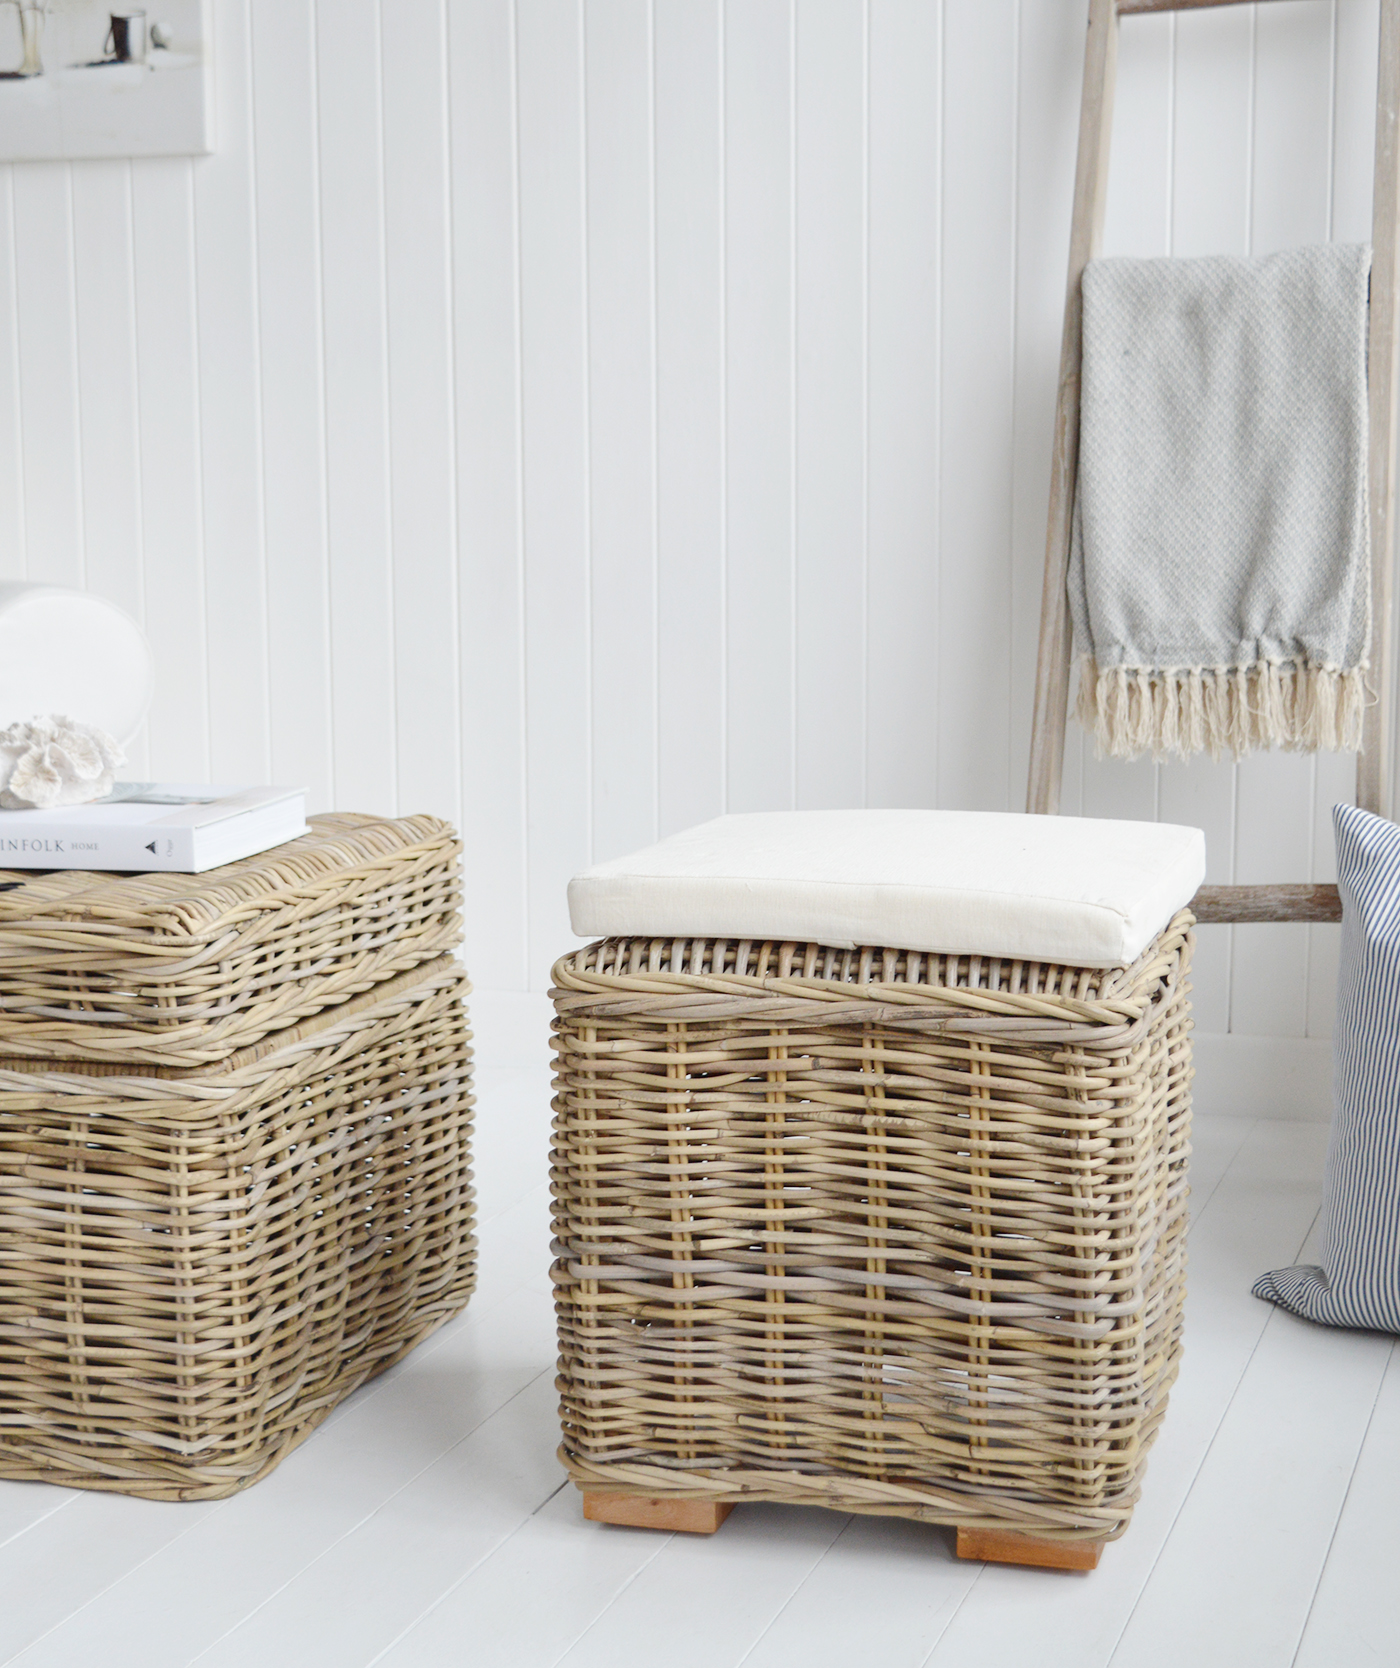 Casco Bay Grey willow stool, Seat or side table - Coastal New England Living Room Furniture